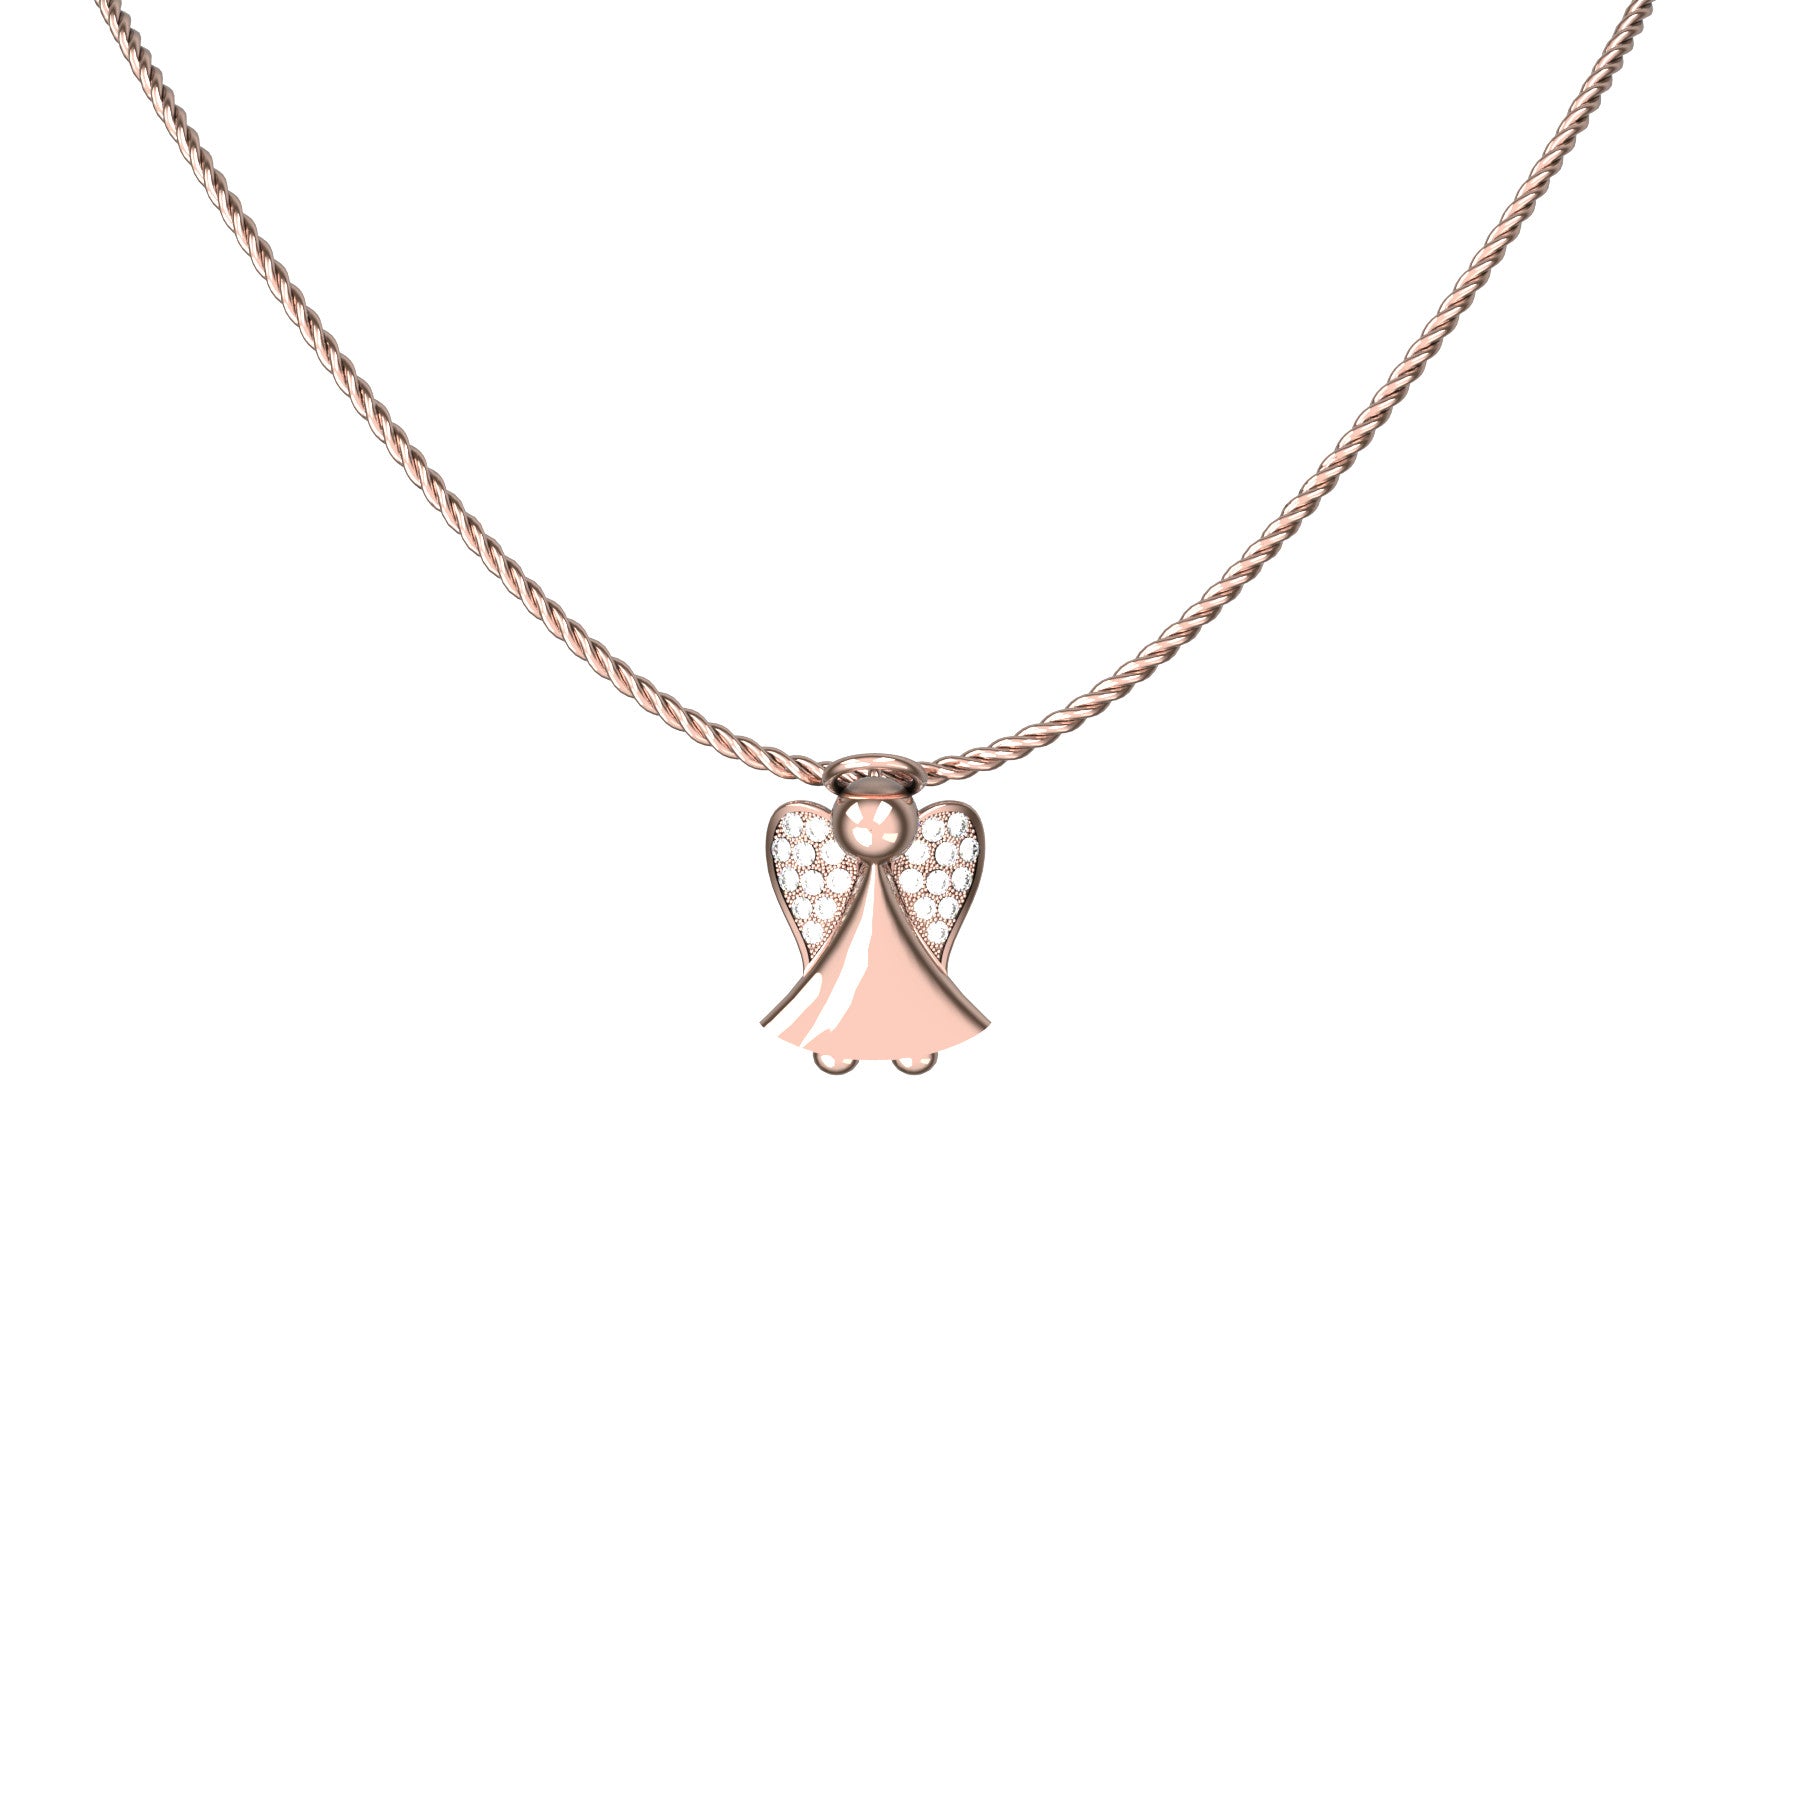 my guardian angel pendant, natural round diamonds, 18 K pink gold, weight about 3,2 g (0.11oz) size 13,4x19,3 mm